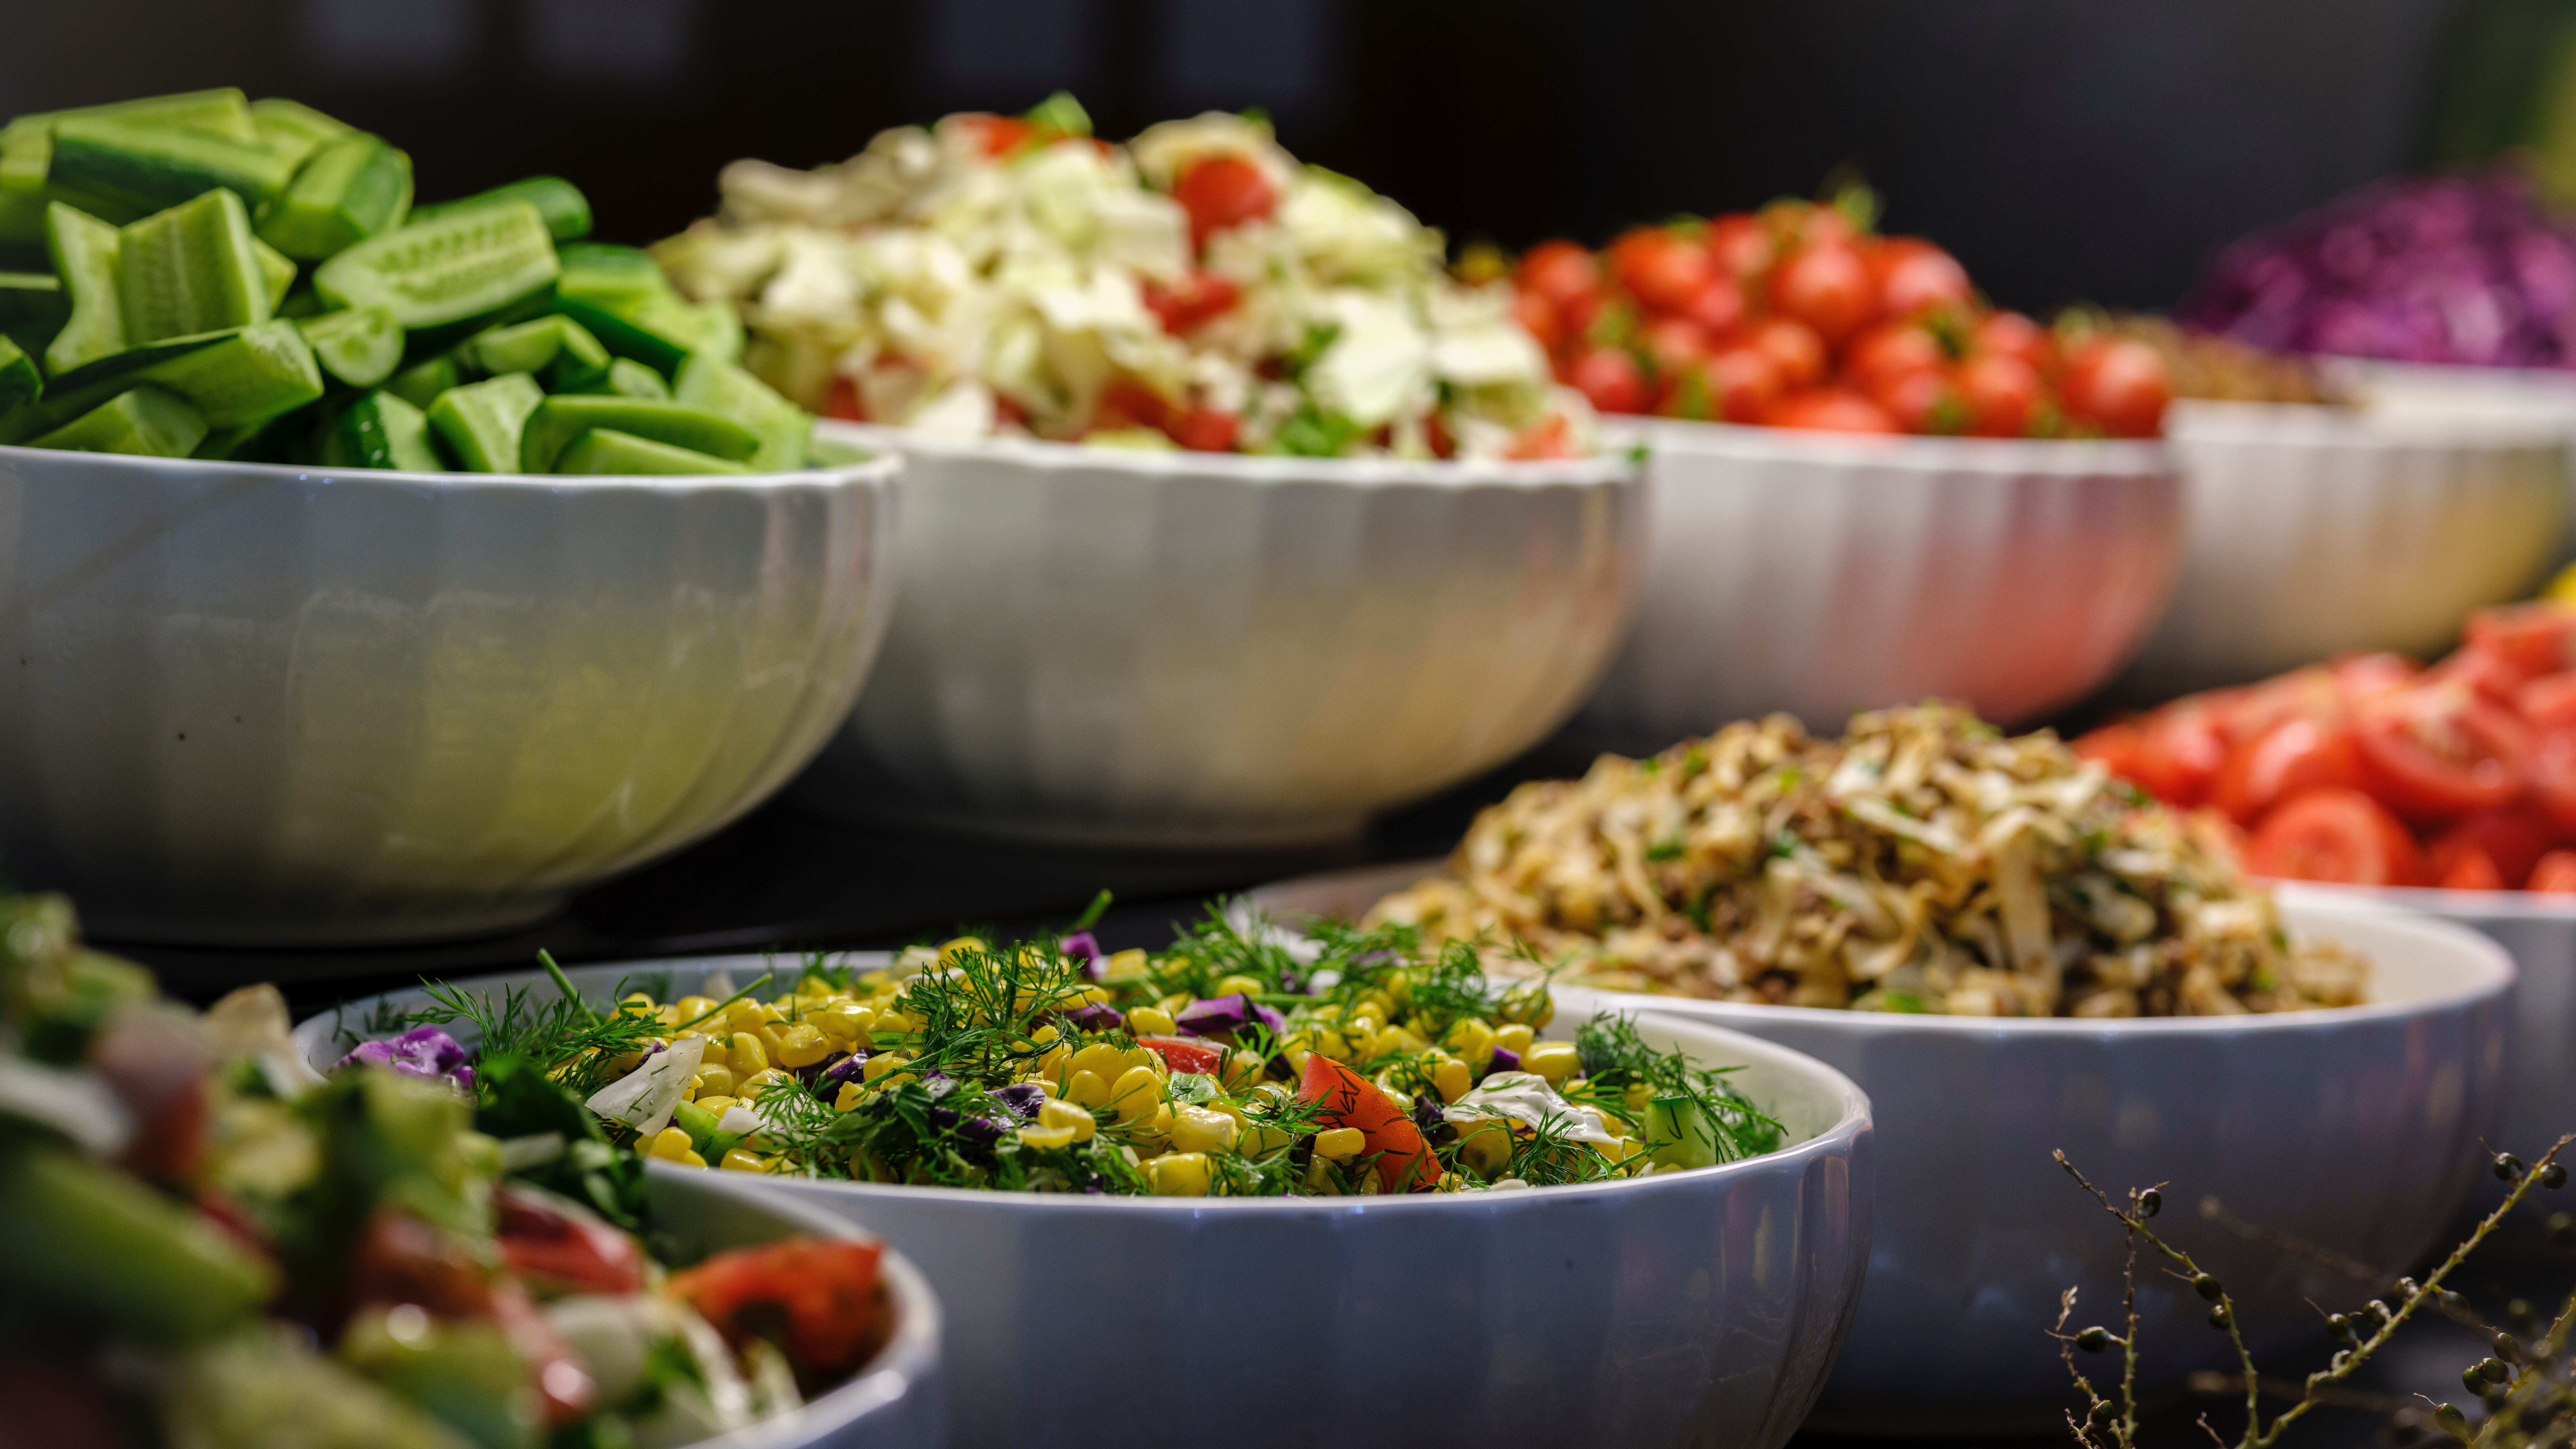 variety of salads on a buffet, suggested as a green event idea to reduce meat consumption